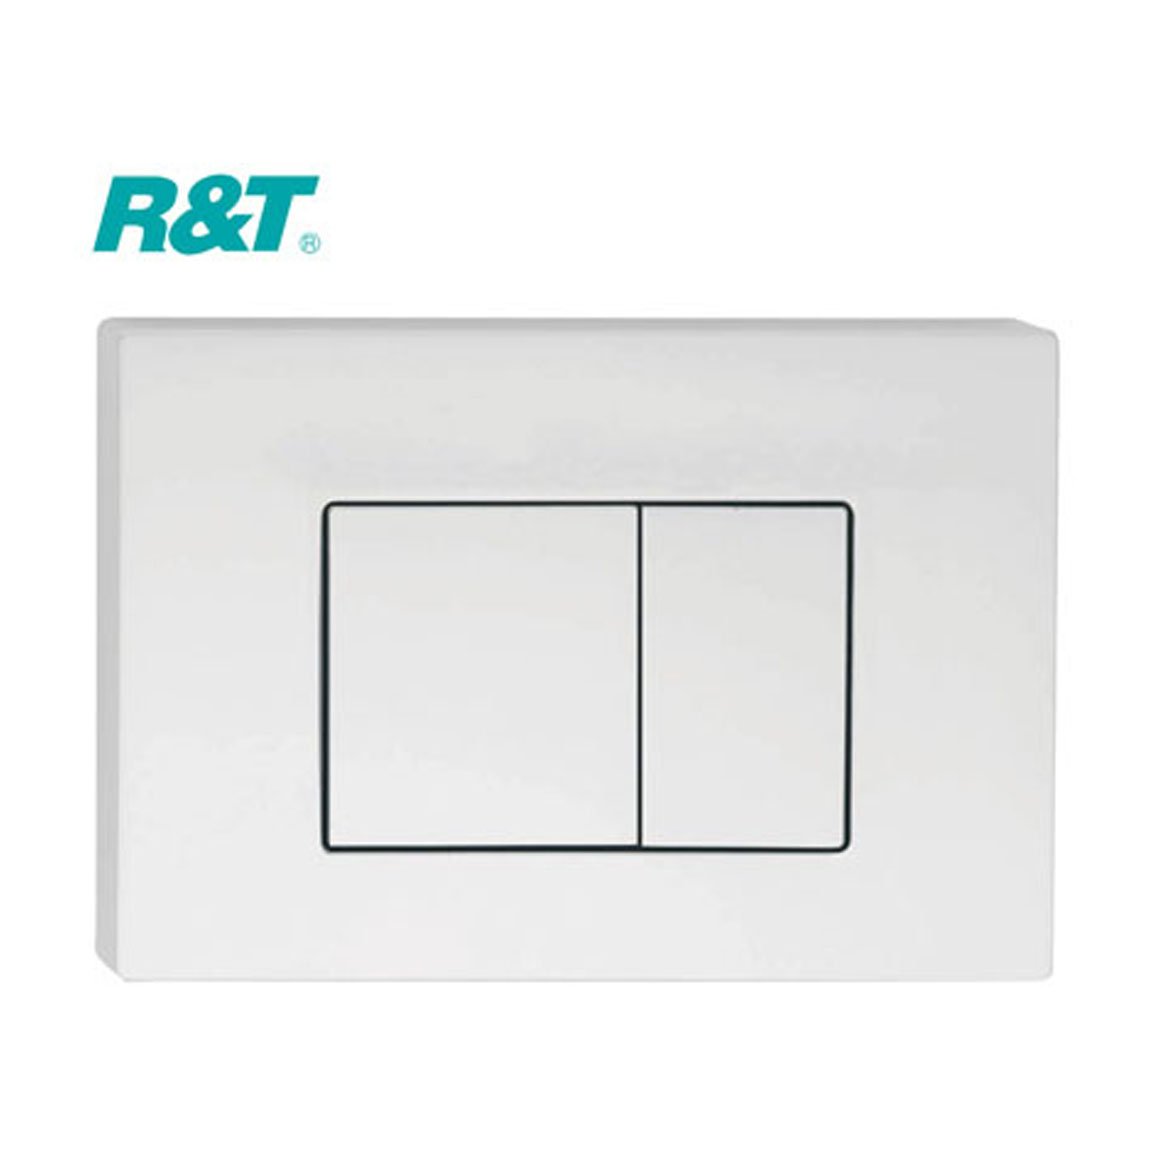 Box Rim Wall Hung Pan With R&T G30031 Framed In Wall Concealed Cistern